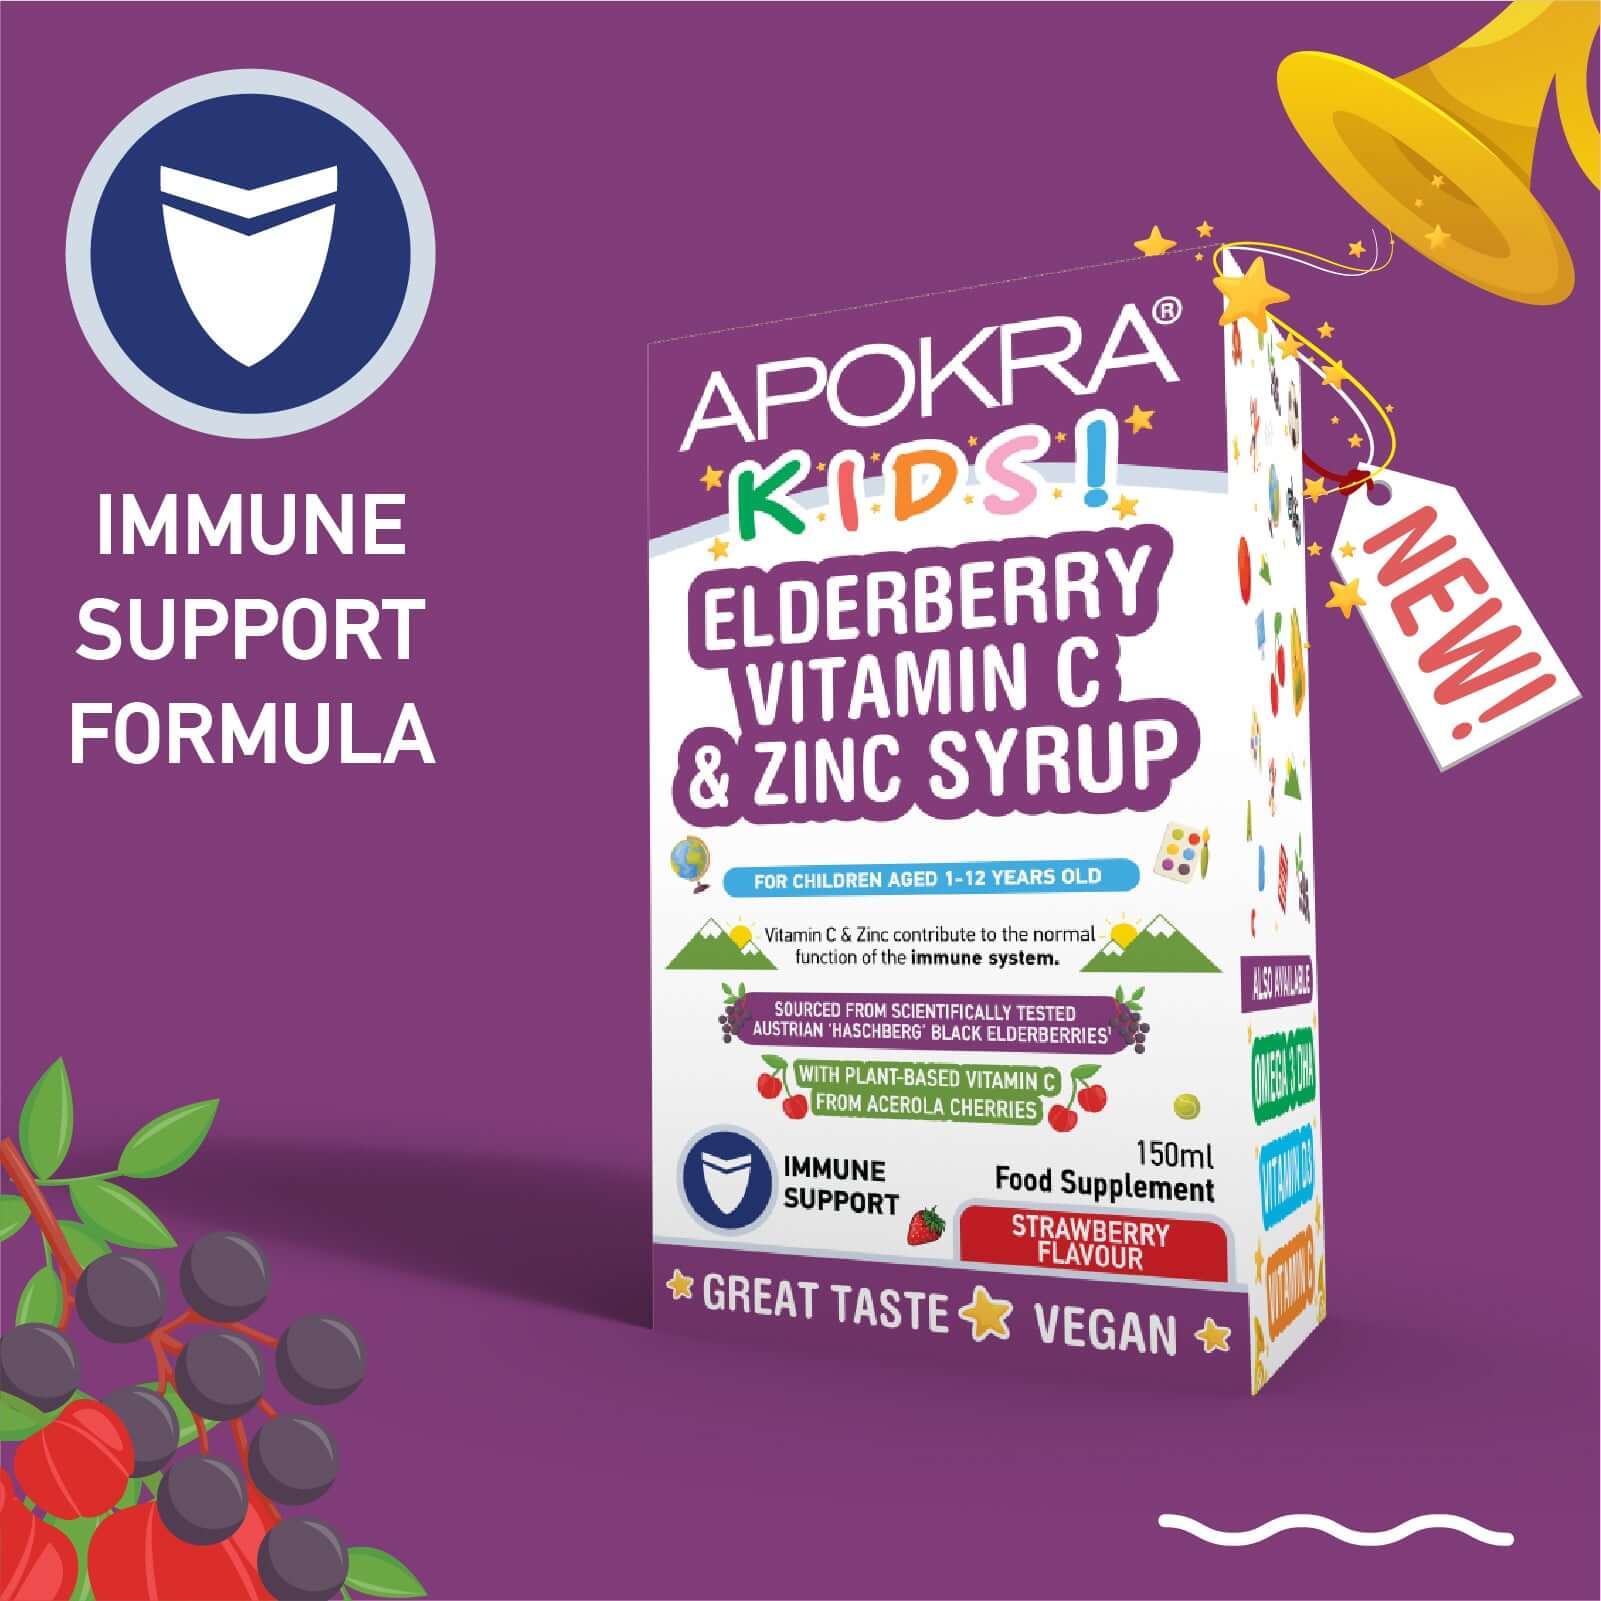 APOKRA Kids Vegan Elderberry Syrup with vitamin C & Zinc for added immune support